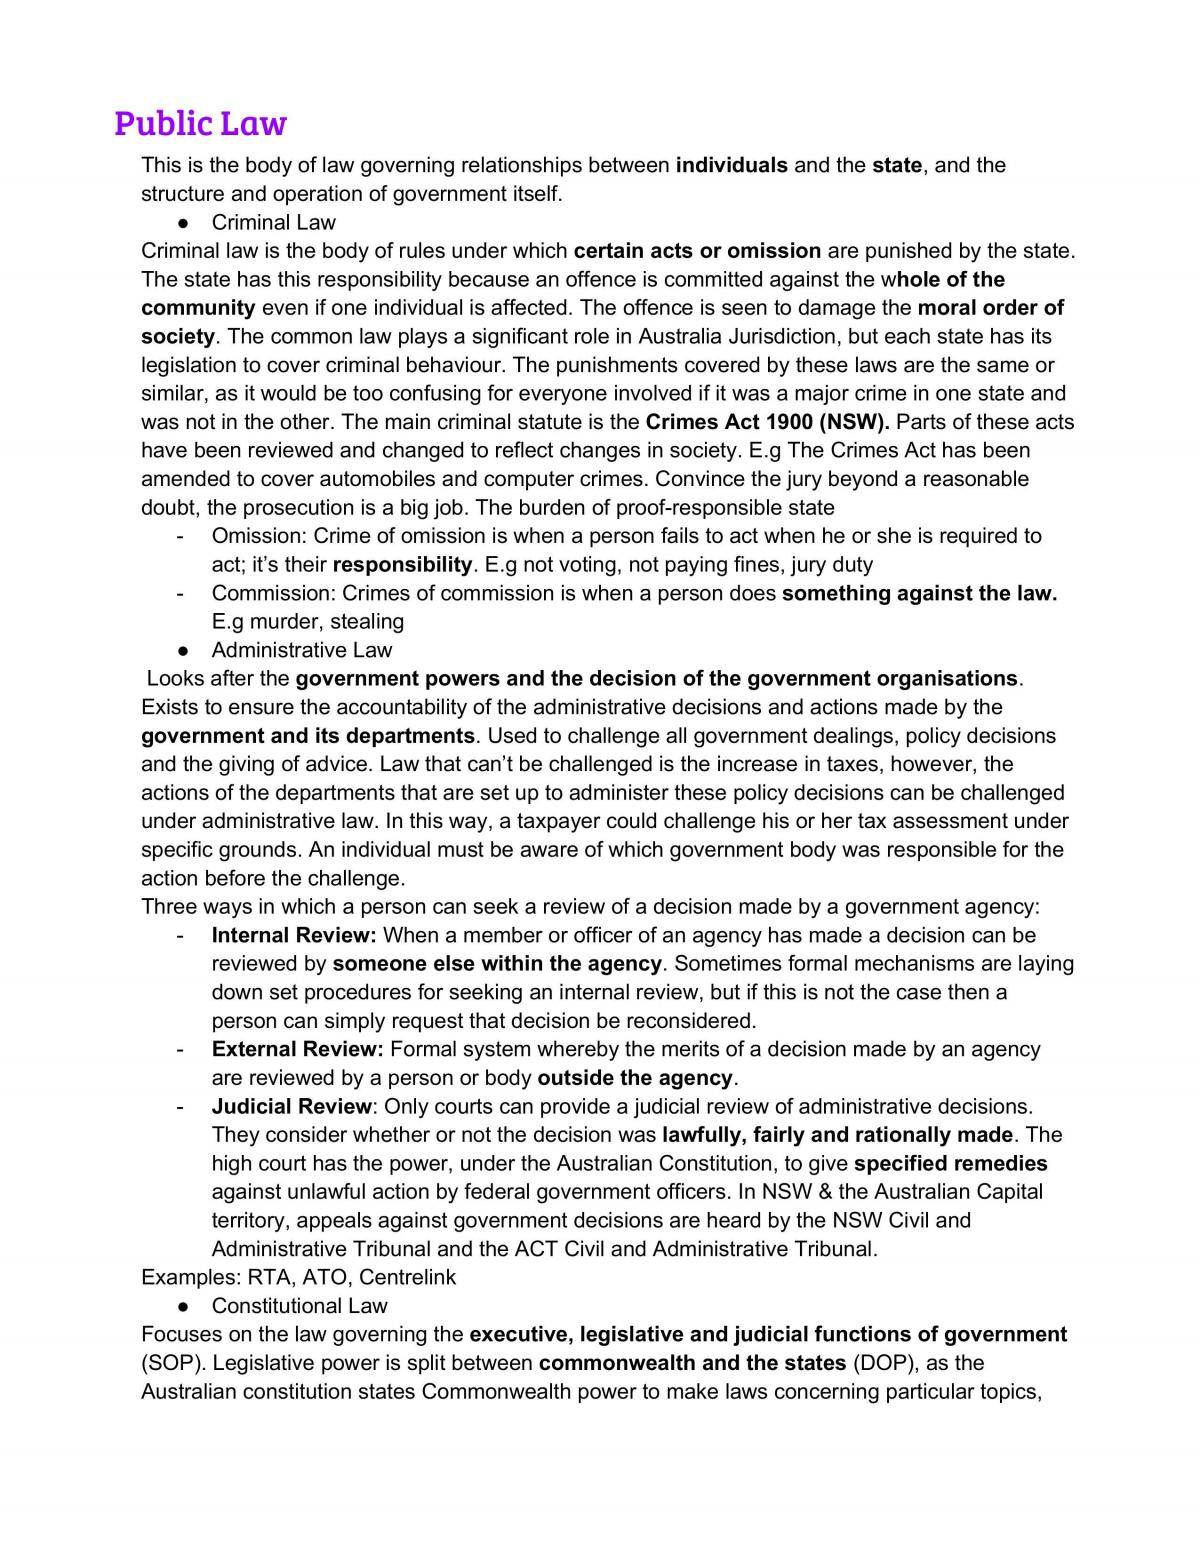 All Notes for legal preliminary - Page 1